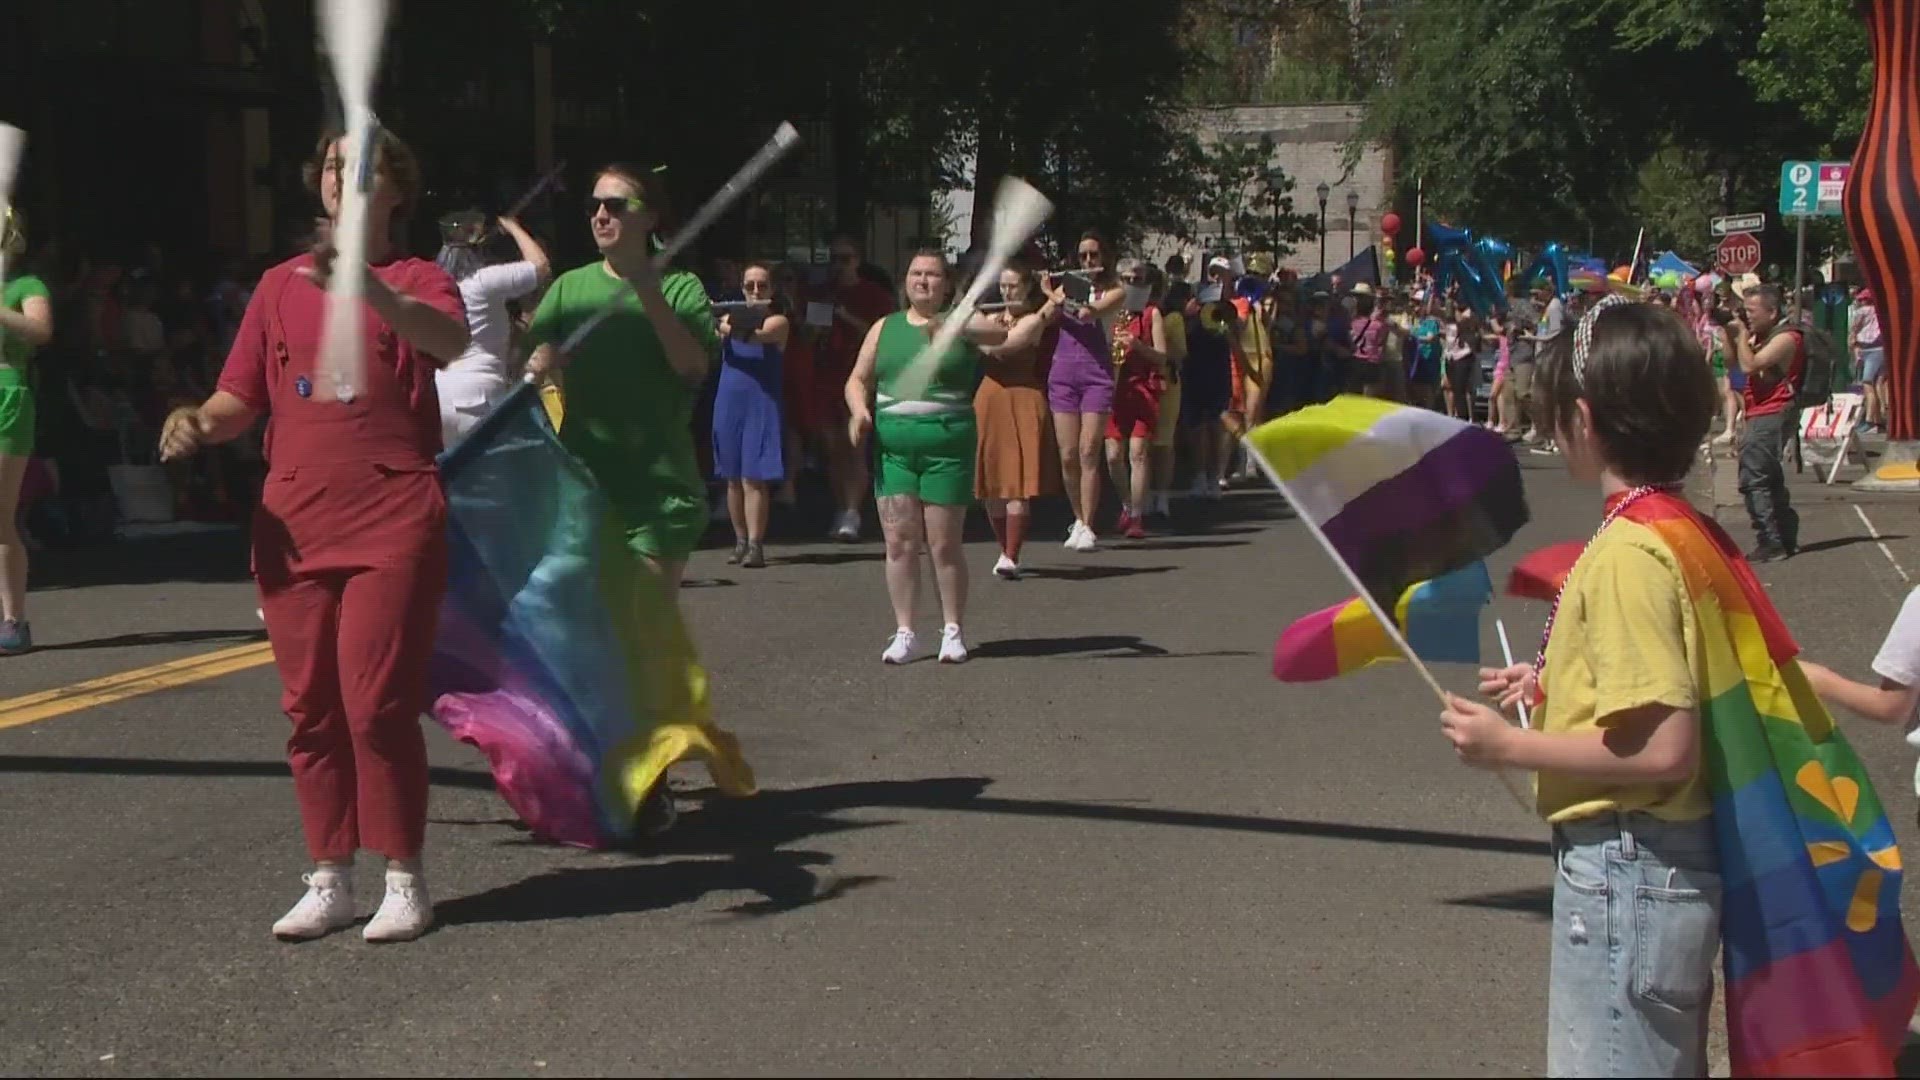 At the Pride Parade this year, it was a family affair — loved ones coming together to share decades-long traditions and those sharing them with new generations.